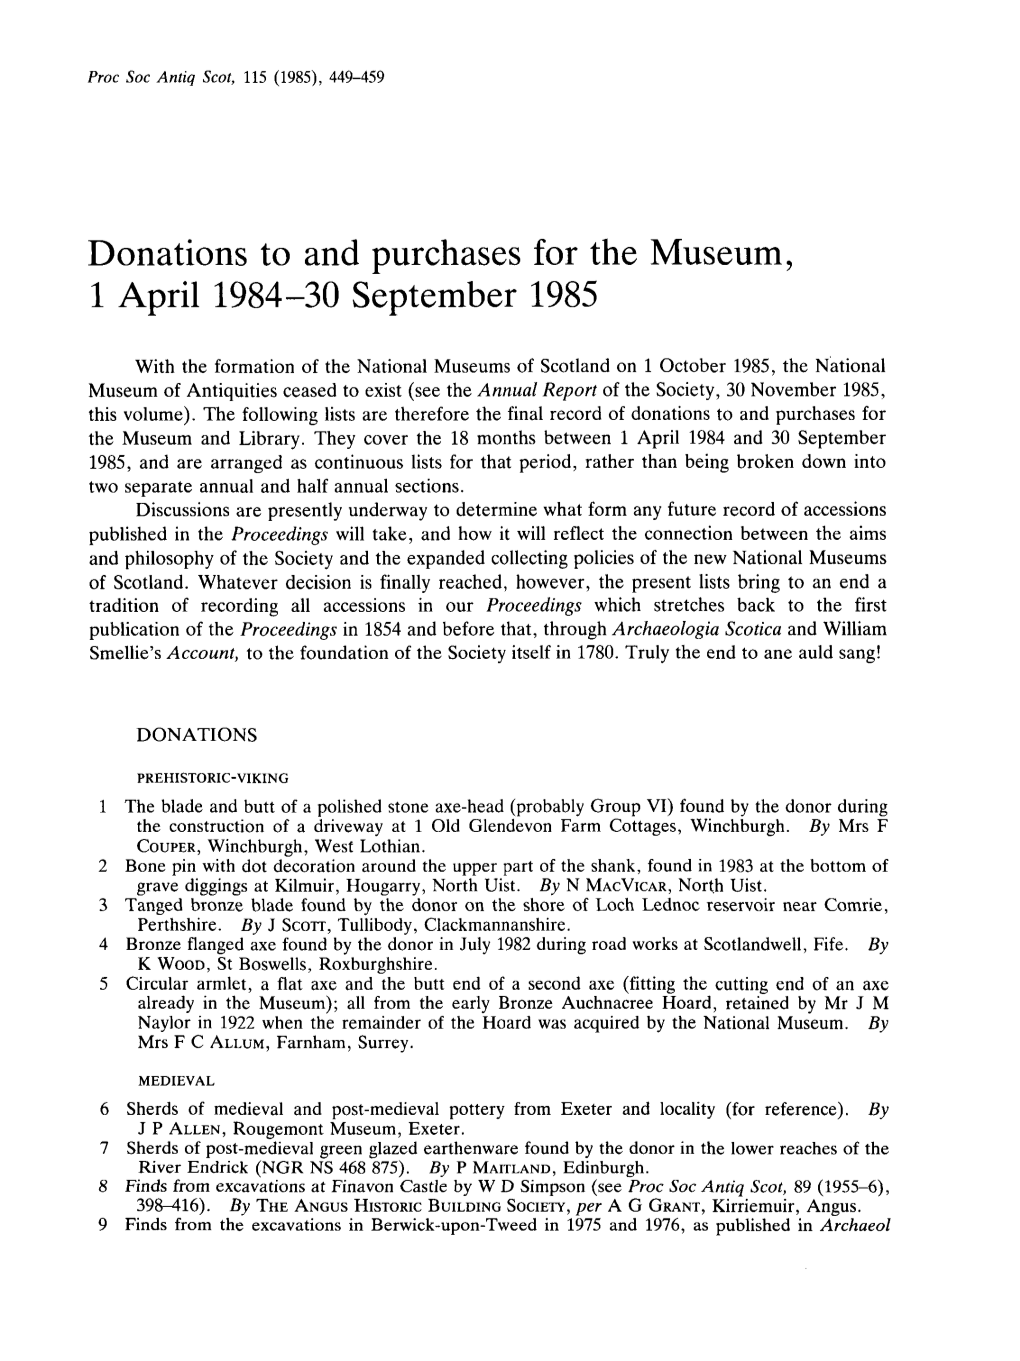 Donations to and Purchases for the Museum, 1 April 1984-30 September 1985